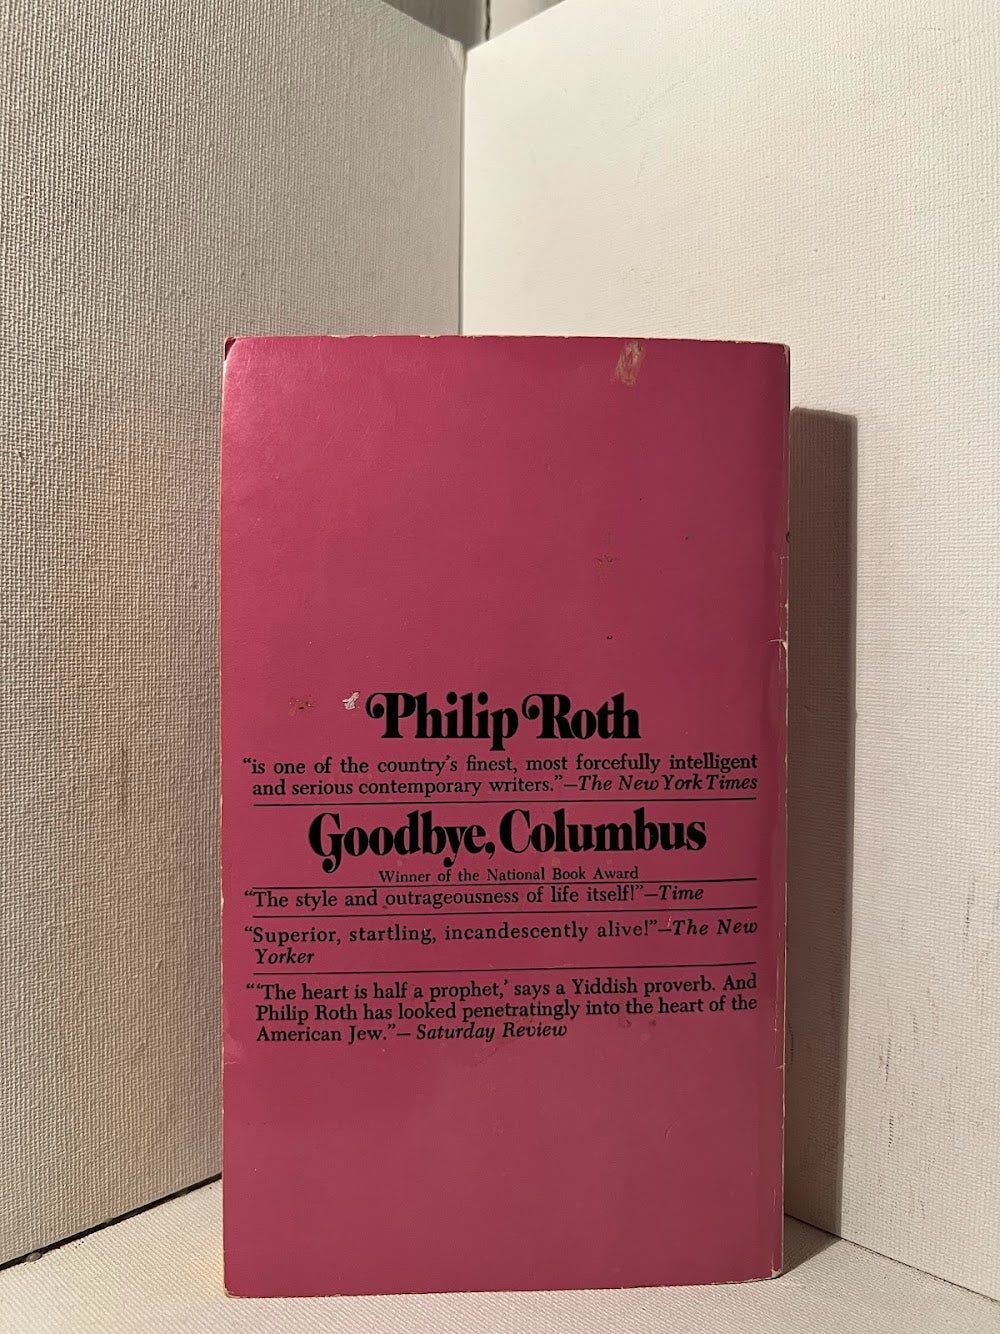 Goodbye, Columbus by Philip Roth